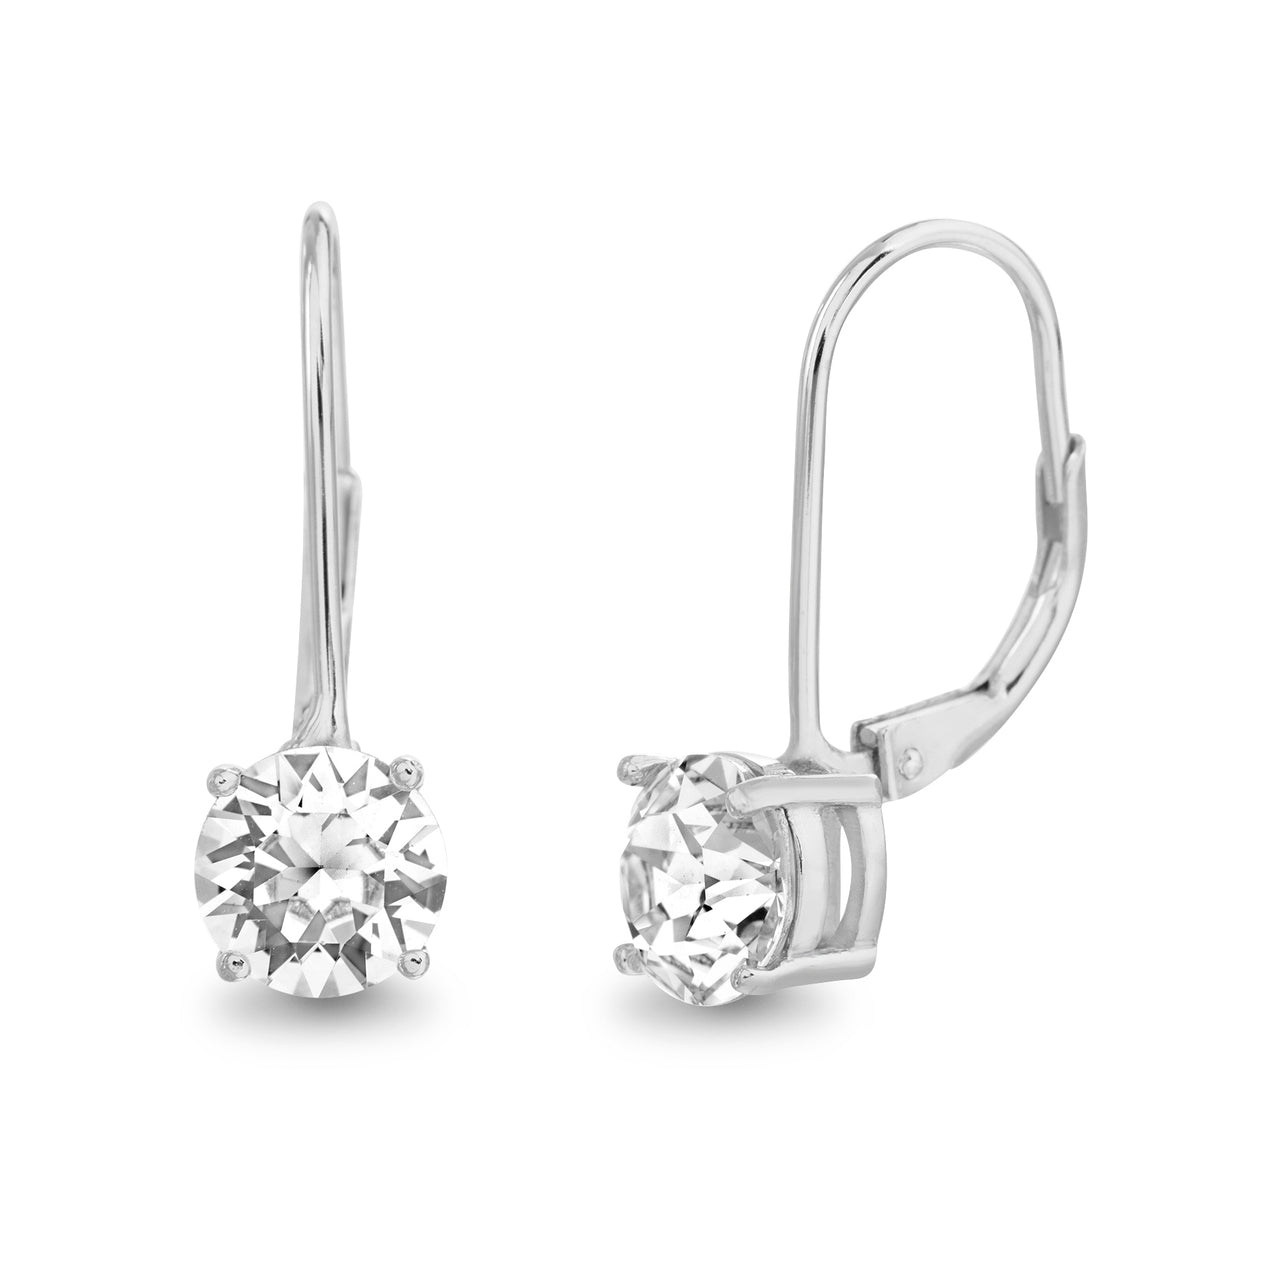 Lesa Michele Crystal Leverback Earrings in Rhodium Plated Sterling Silver